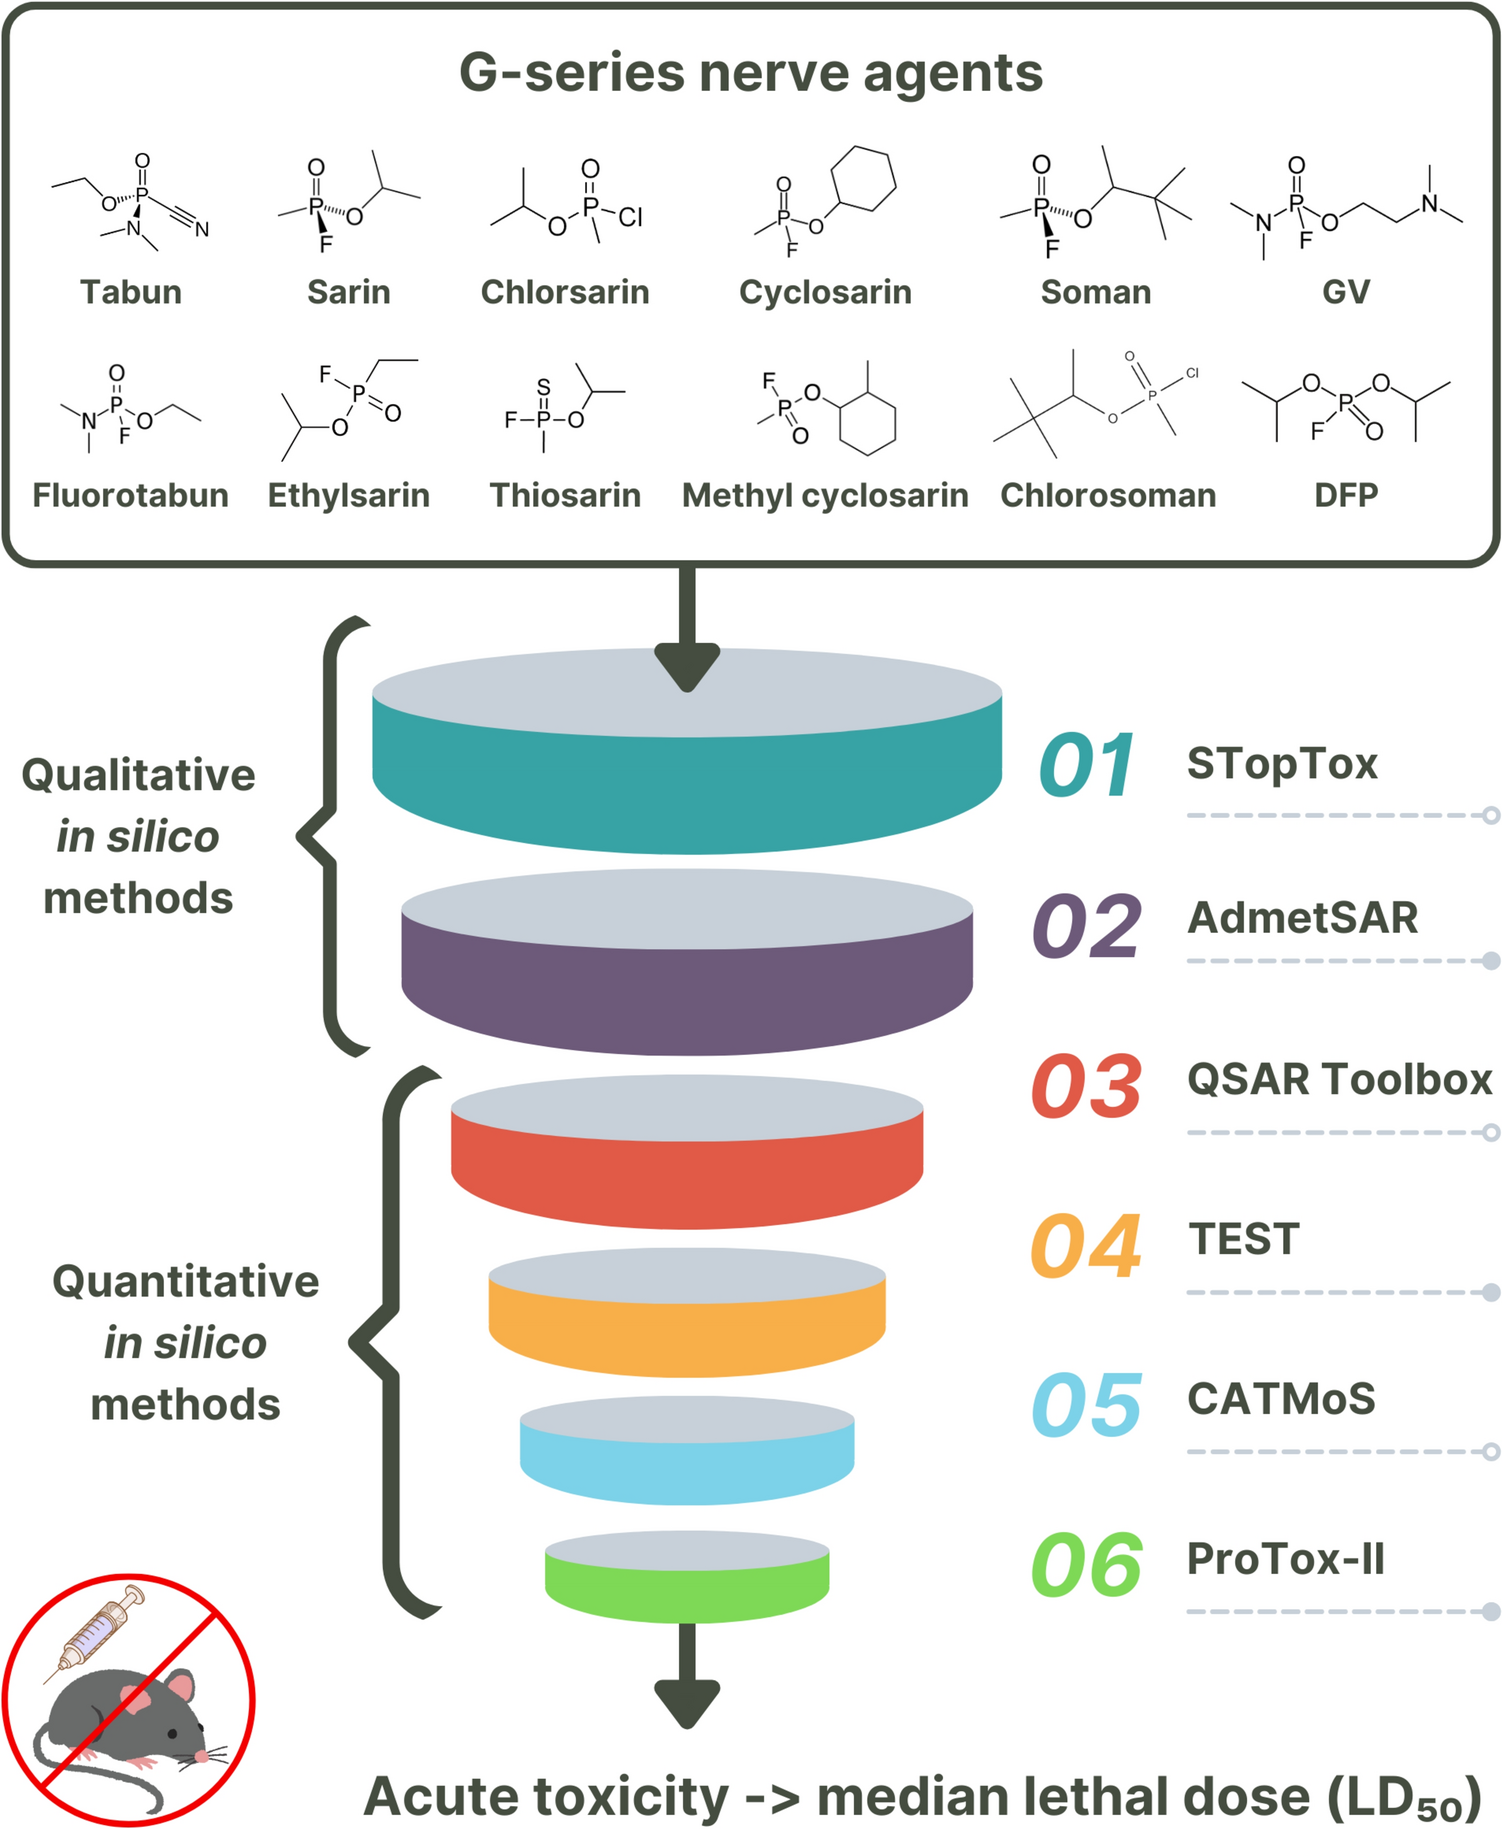 The estimation of acute oral toxicity (LD50) of G-series organophosphorus-based chemical warfare agents using quantitative and qualitative toxicology in silico methods